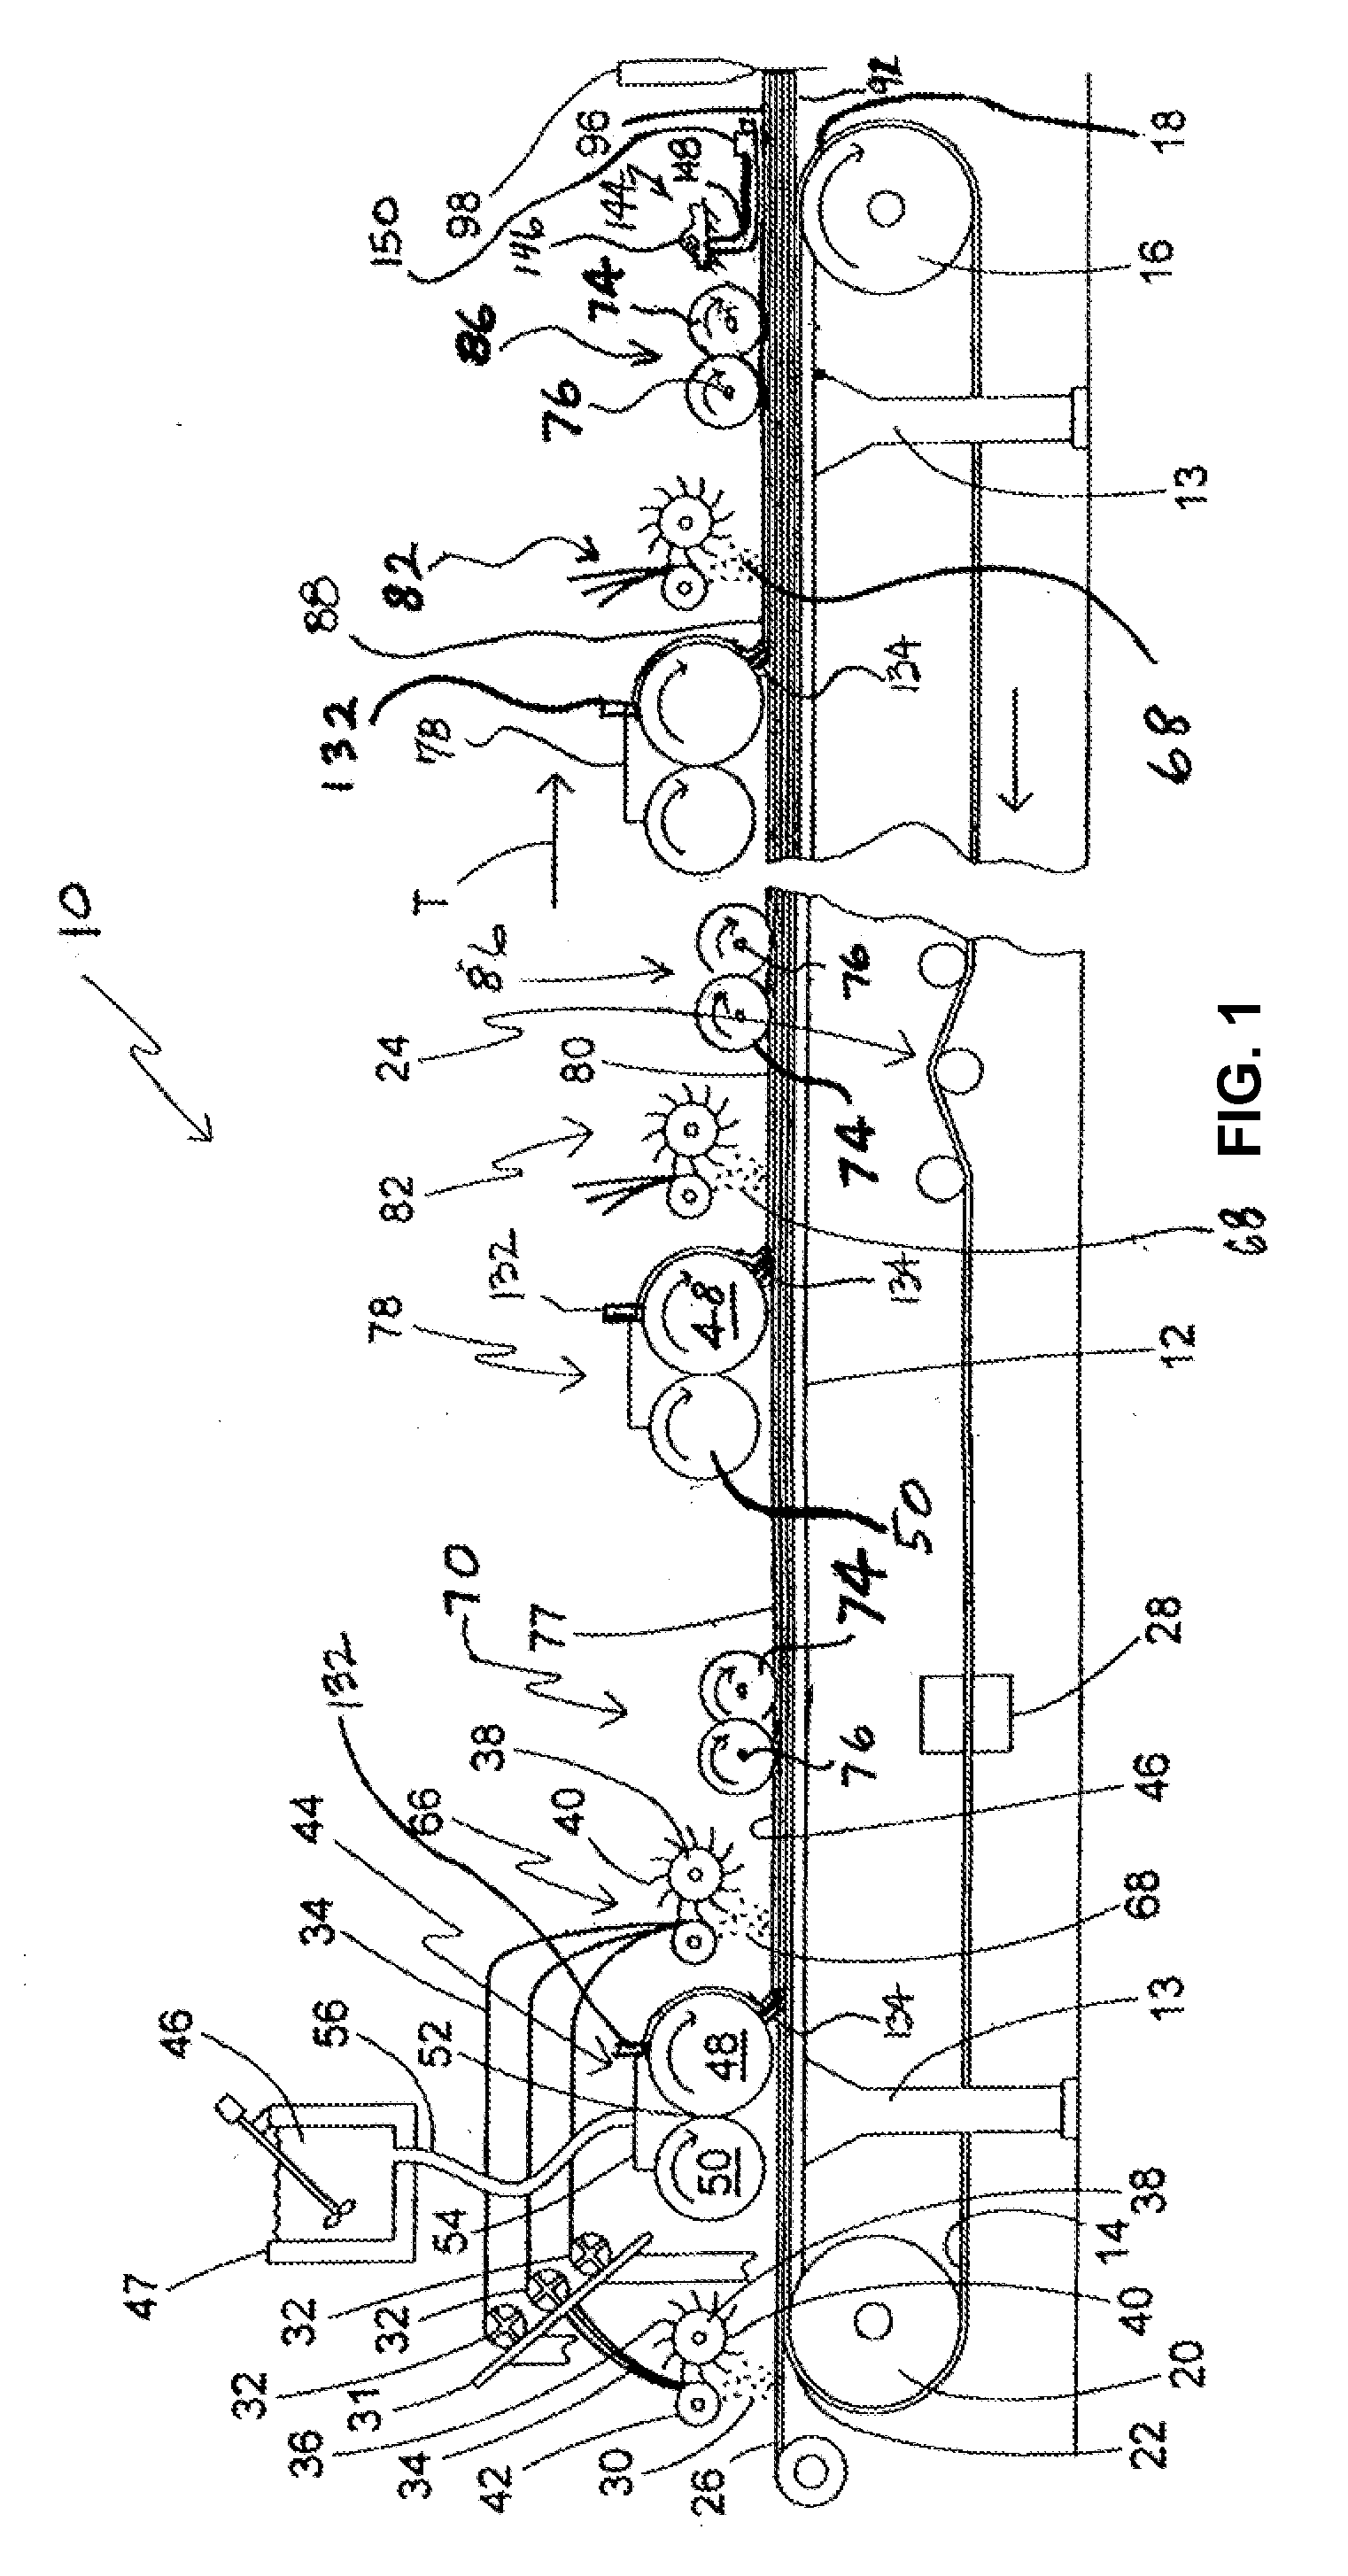 Panel smoothing process and apparatus for forming a smooth continuous surface on fiber-reinforced structural cement panels